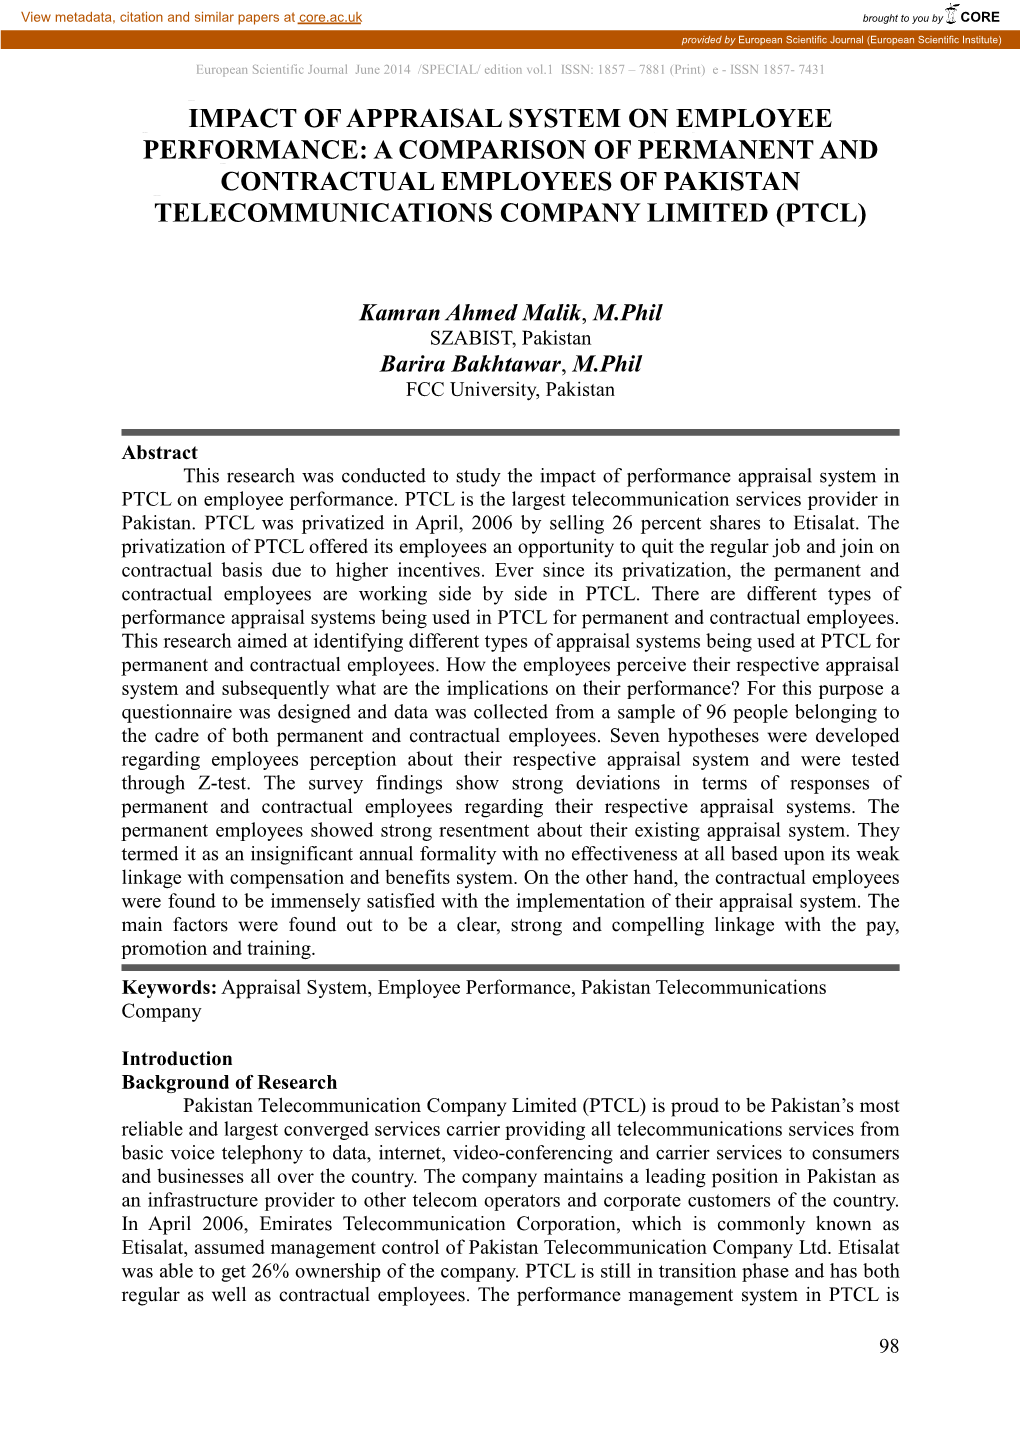 Impact of Appraisal System on Employee Performance: a Comparison of Permanent and Contractual Employees of Pakistan Telecommunications Company Limited (Ptcl)